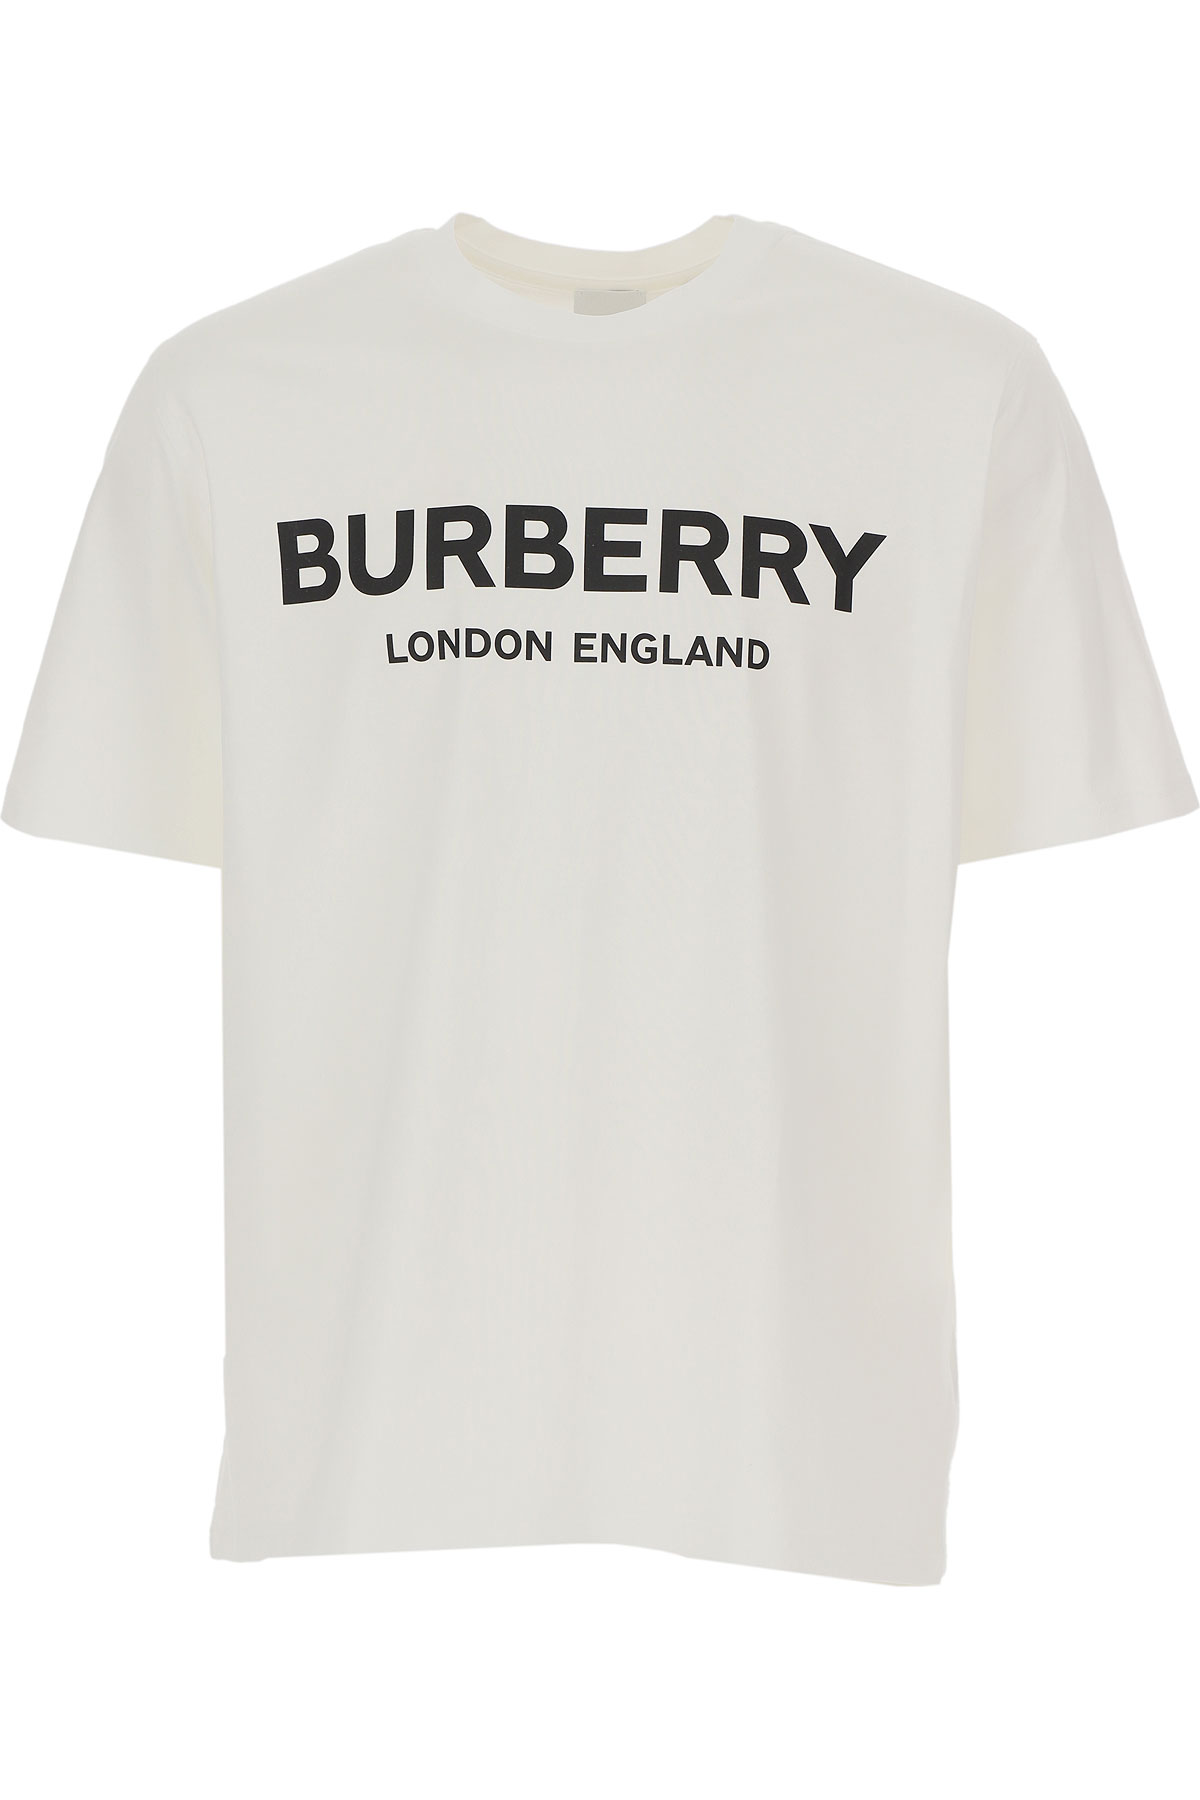 Mens Clothing Burberry, Style code: 8026017-a1464-